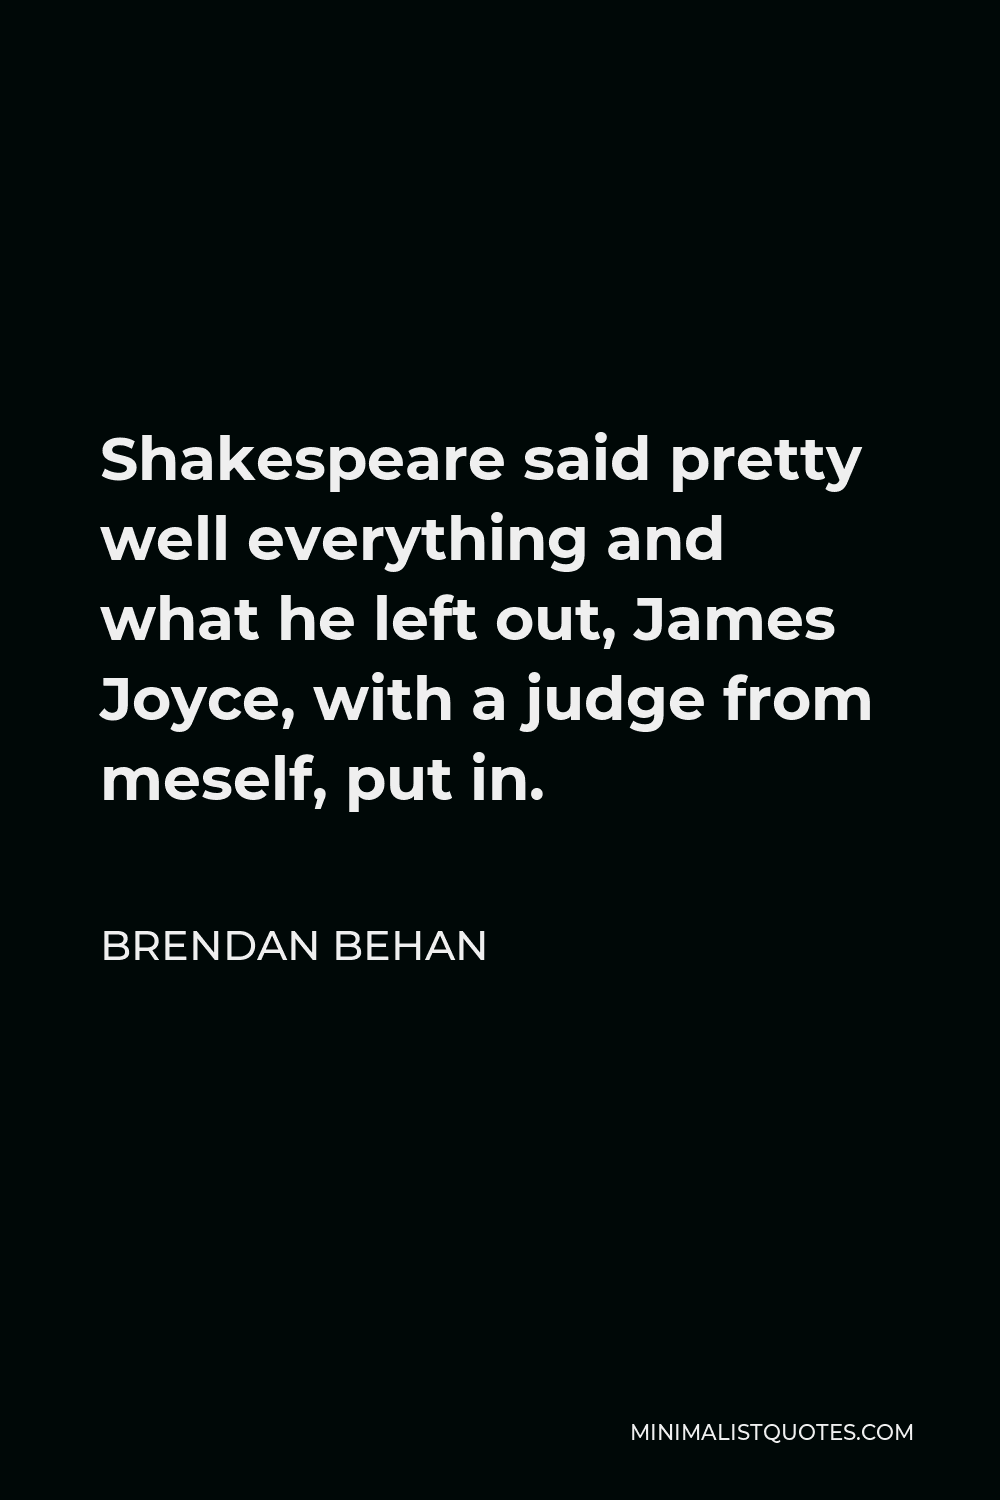 Brendan Behan Quote - Shakespeare said pretty well everything and what he left out, James Joyce, with a judge from meself, put in.